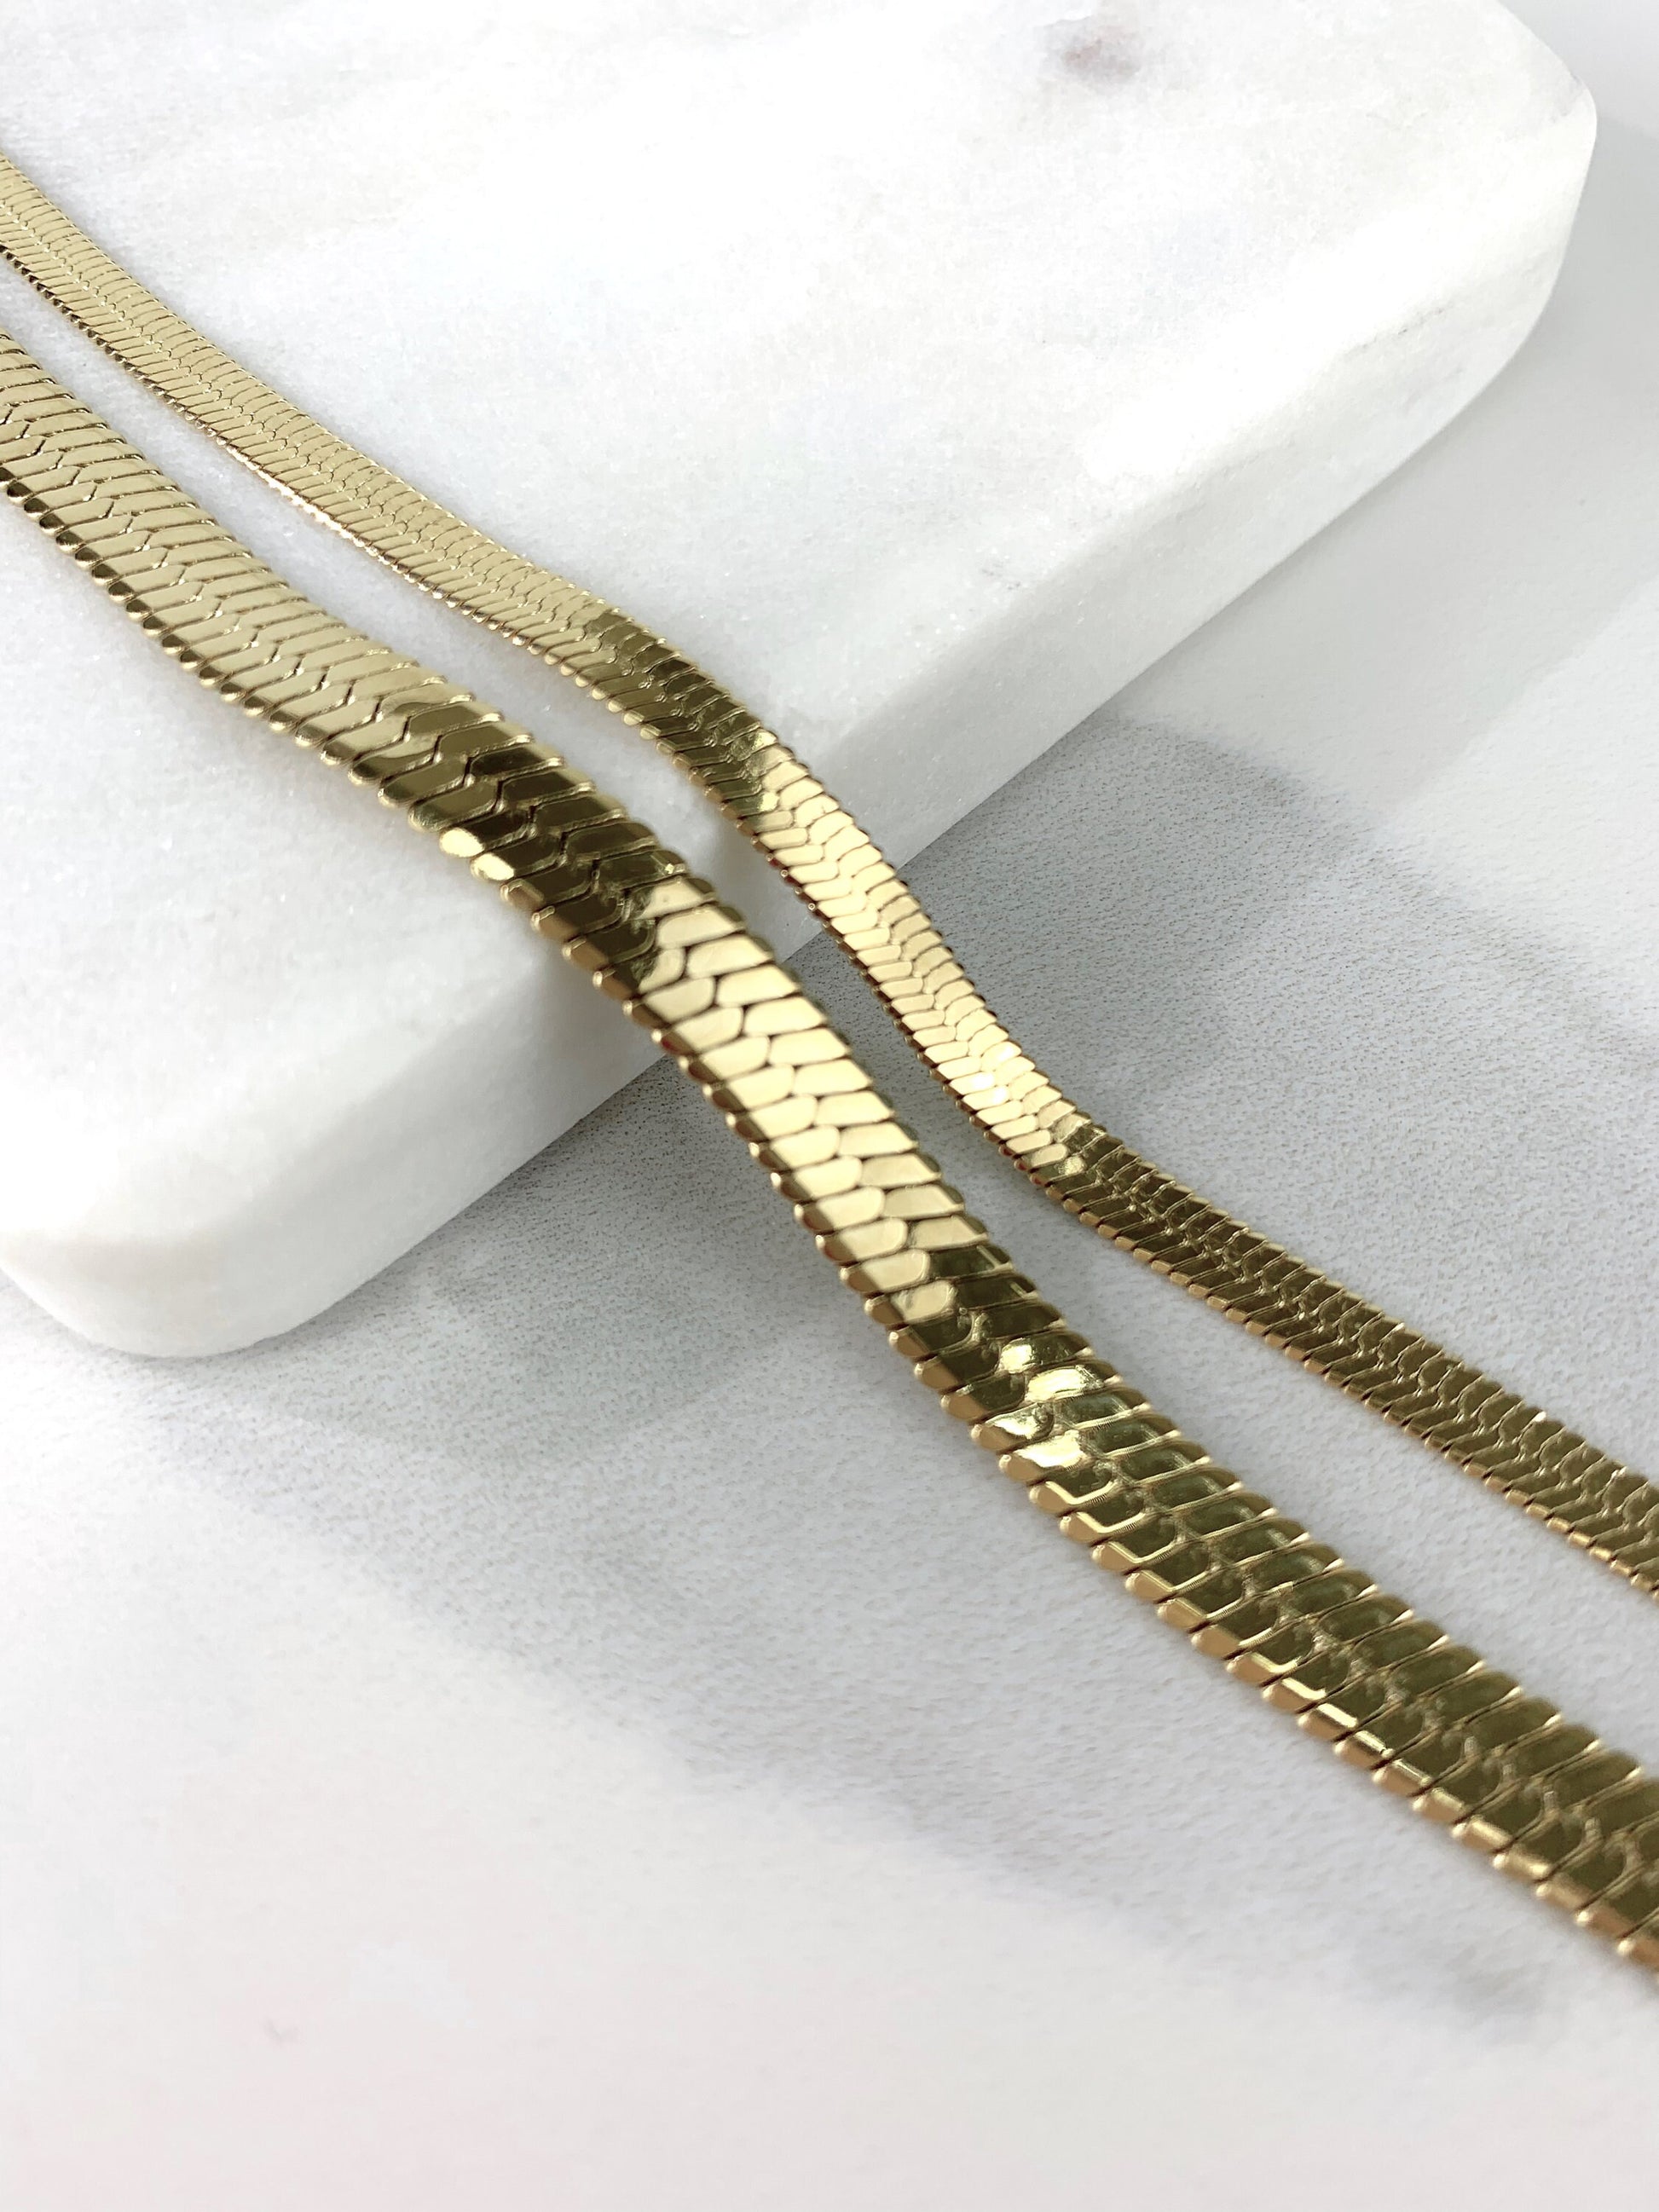 14k Gold Filled Plain Herringbone Link Anklet 4mm or 6mm Thickness Wholesale Jewelry Making Supplies